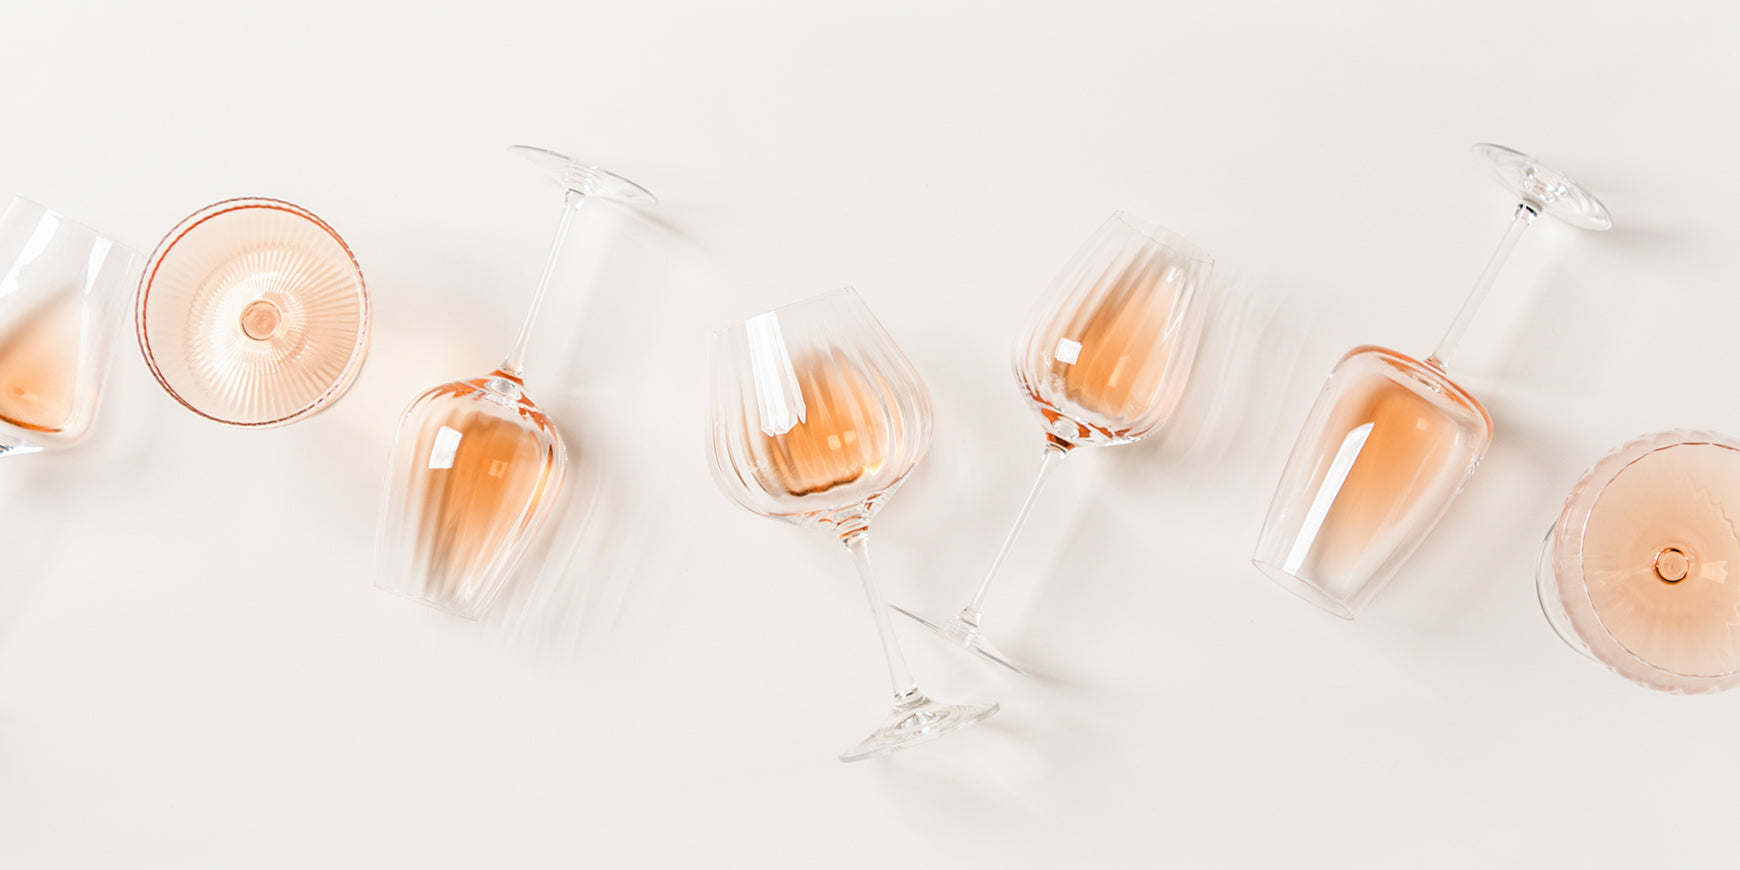 Lined up wine glasses